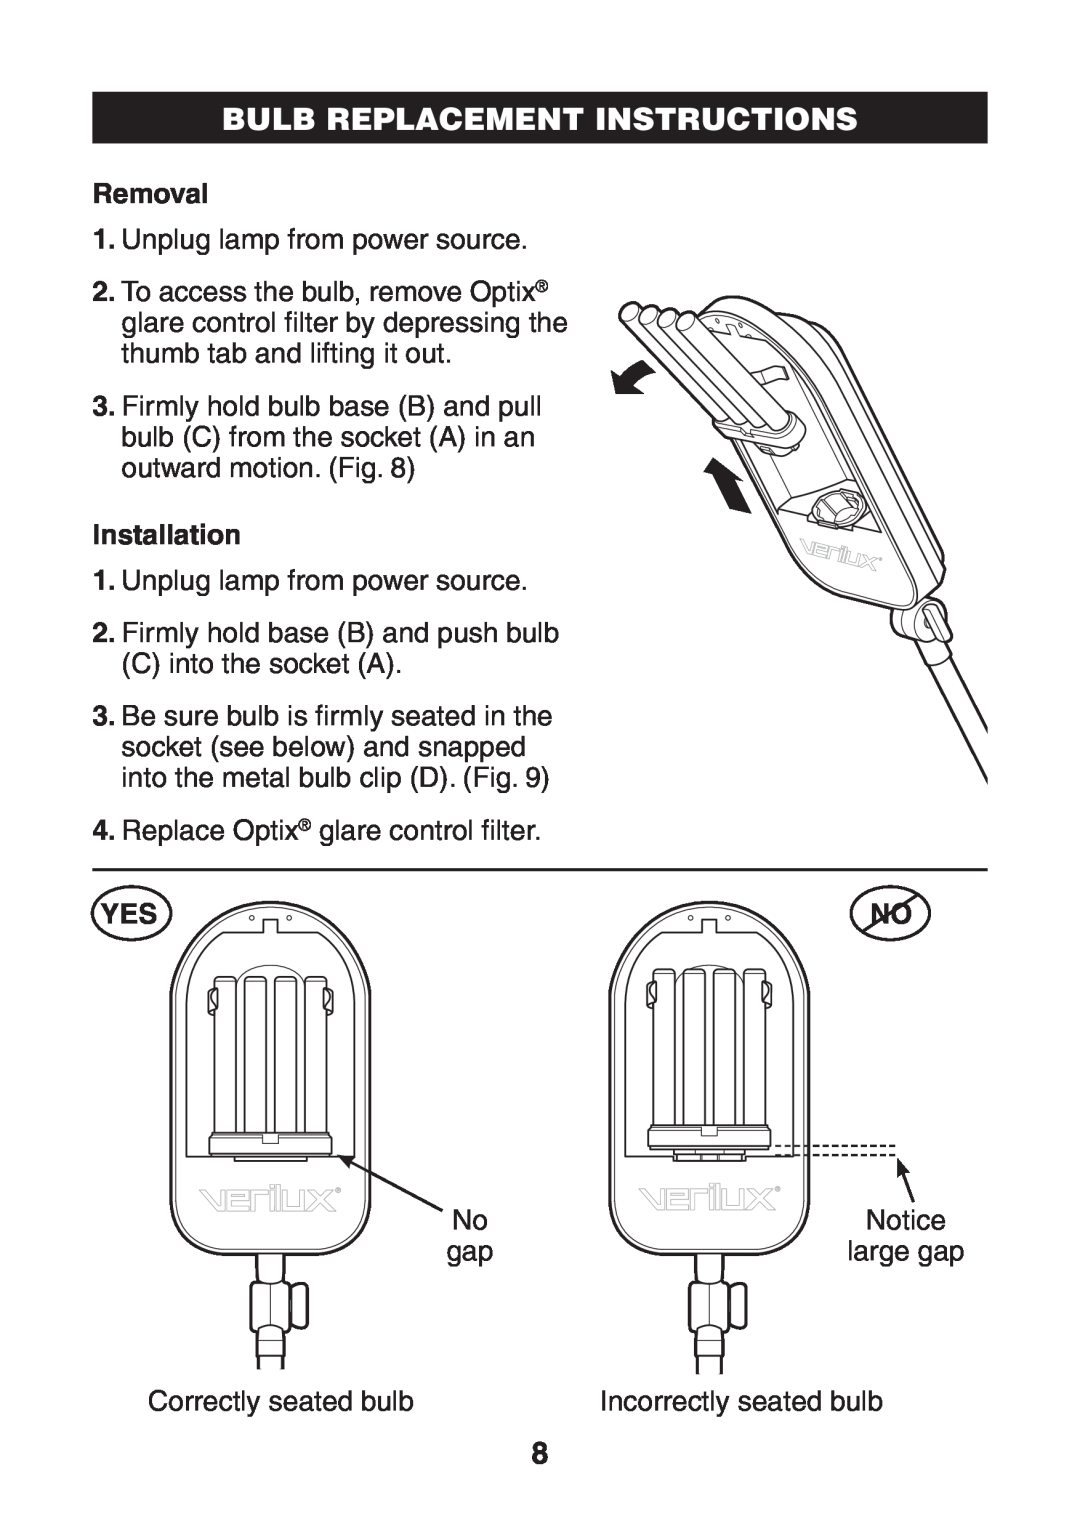 Verilux VD03 manual Bulb Replacement Instructions, Removal, Installation 